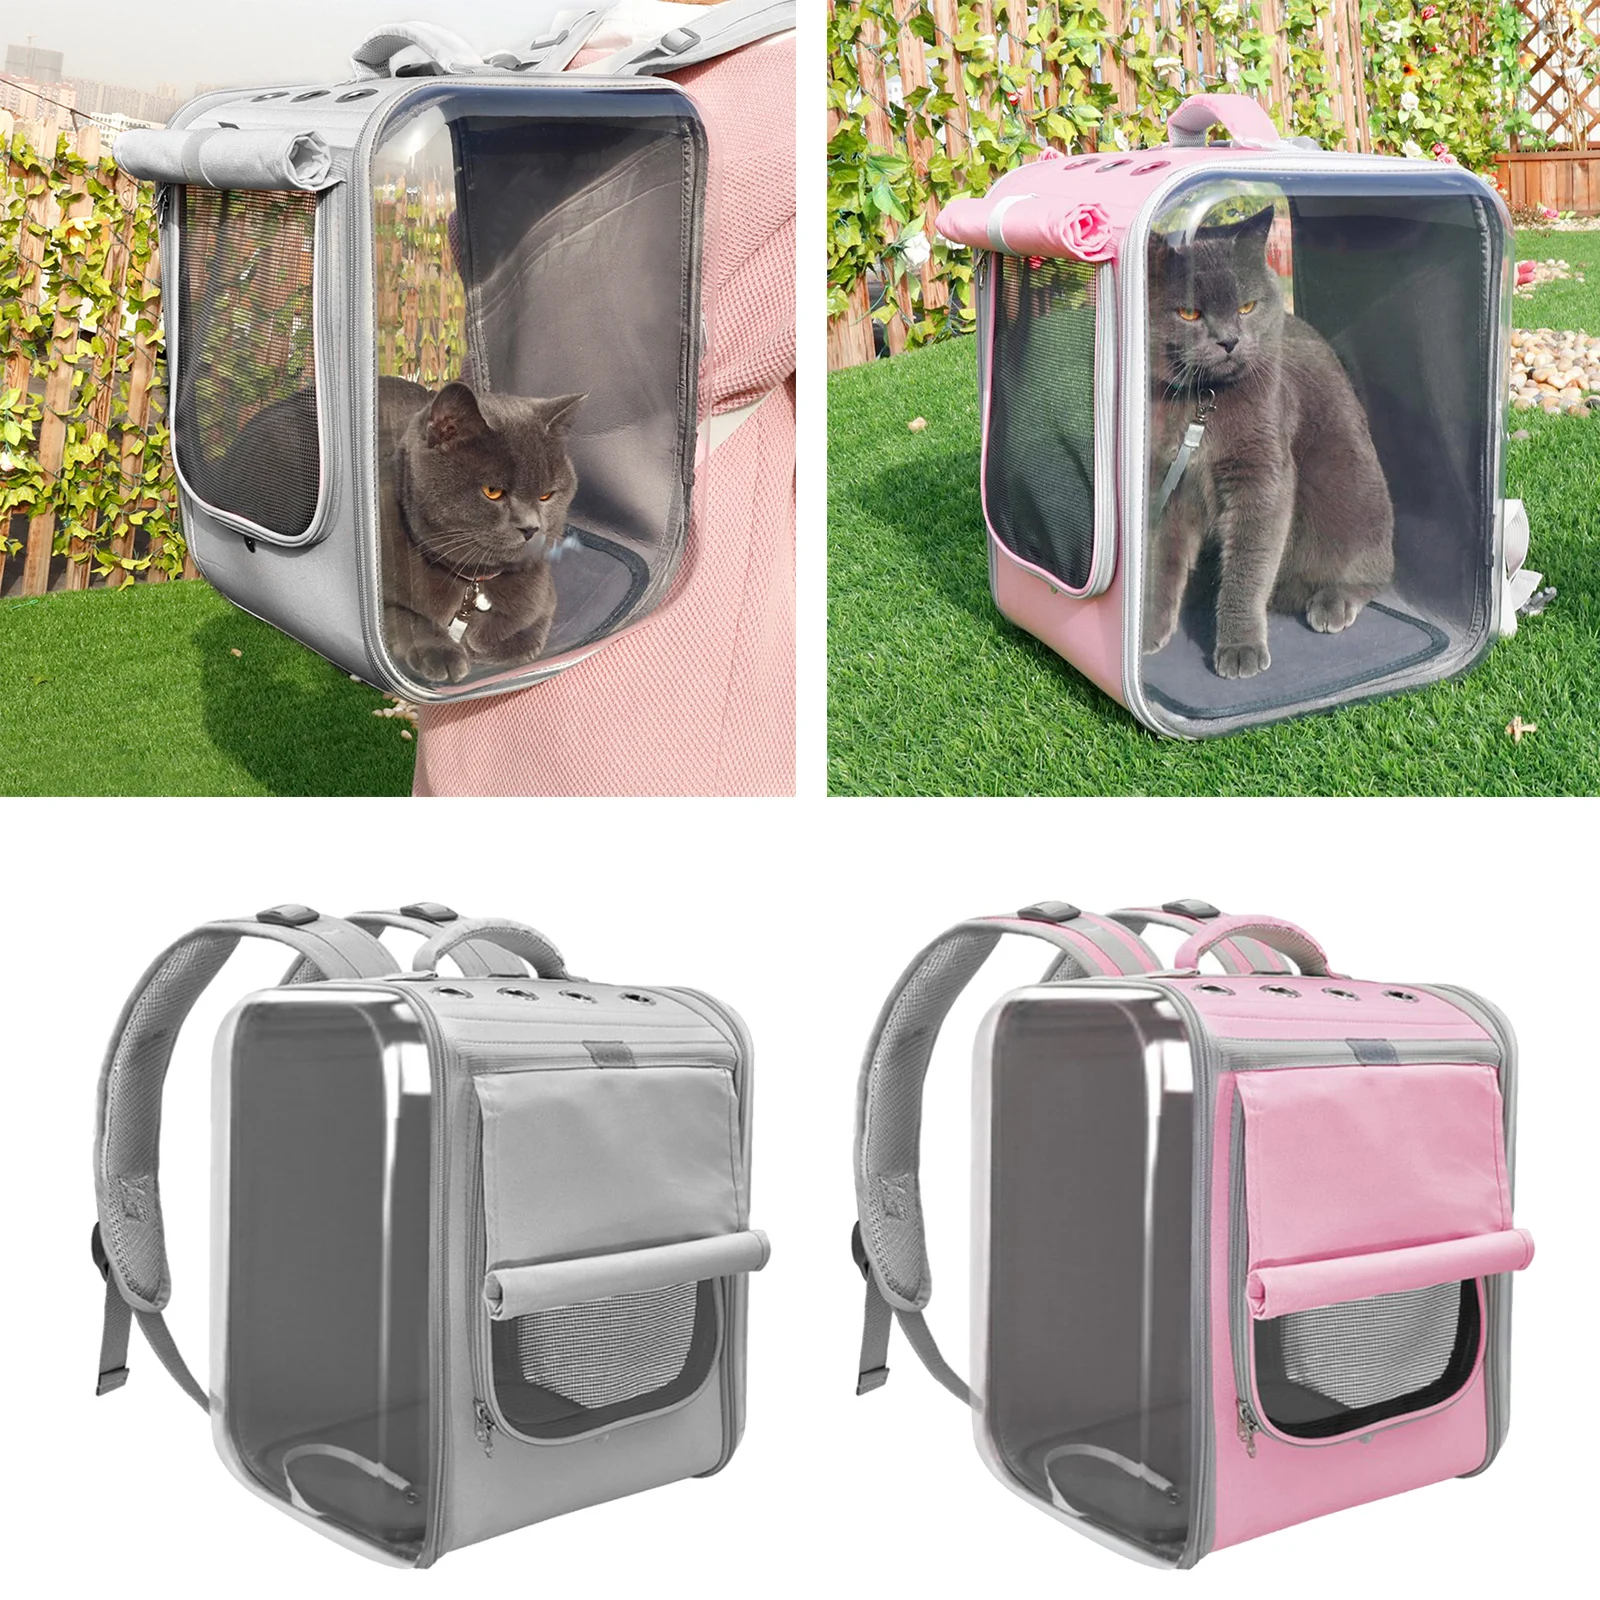 Pet Cat Carrier Backpack Breathable Travel Outdoor Shoulder Bag For Small Dog Cat Portable Packaging Carrying Bag Pet Supplies